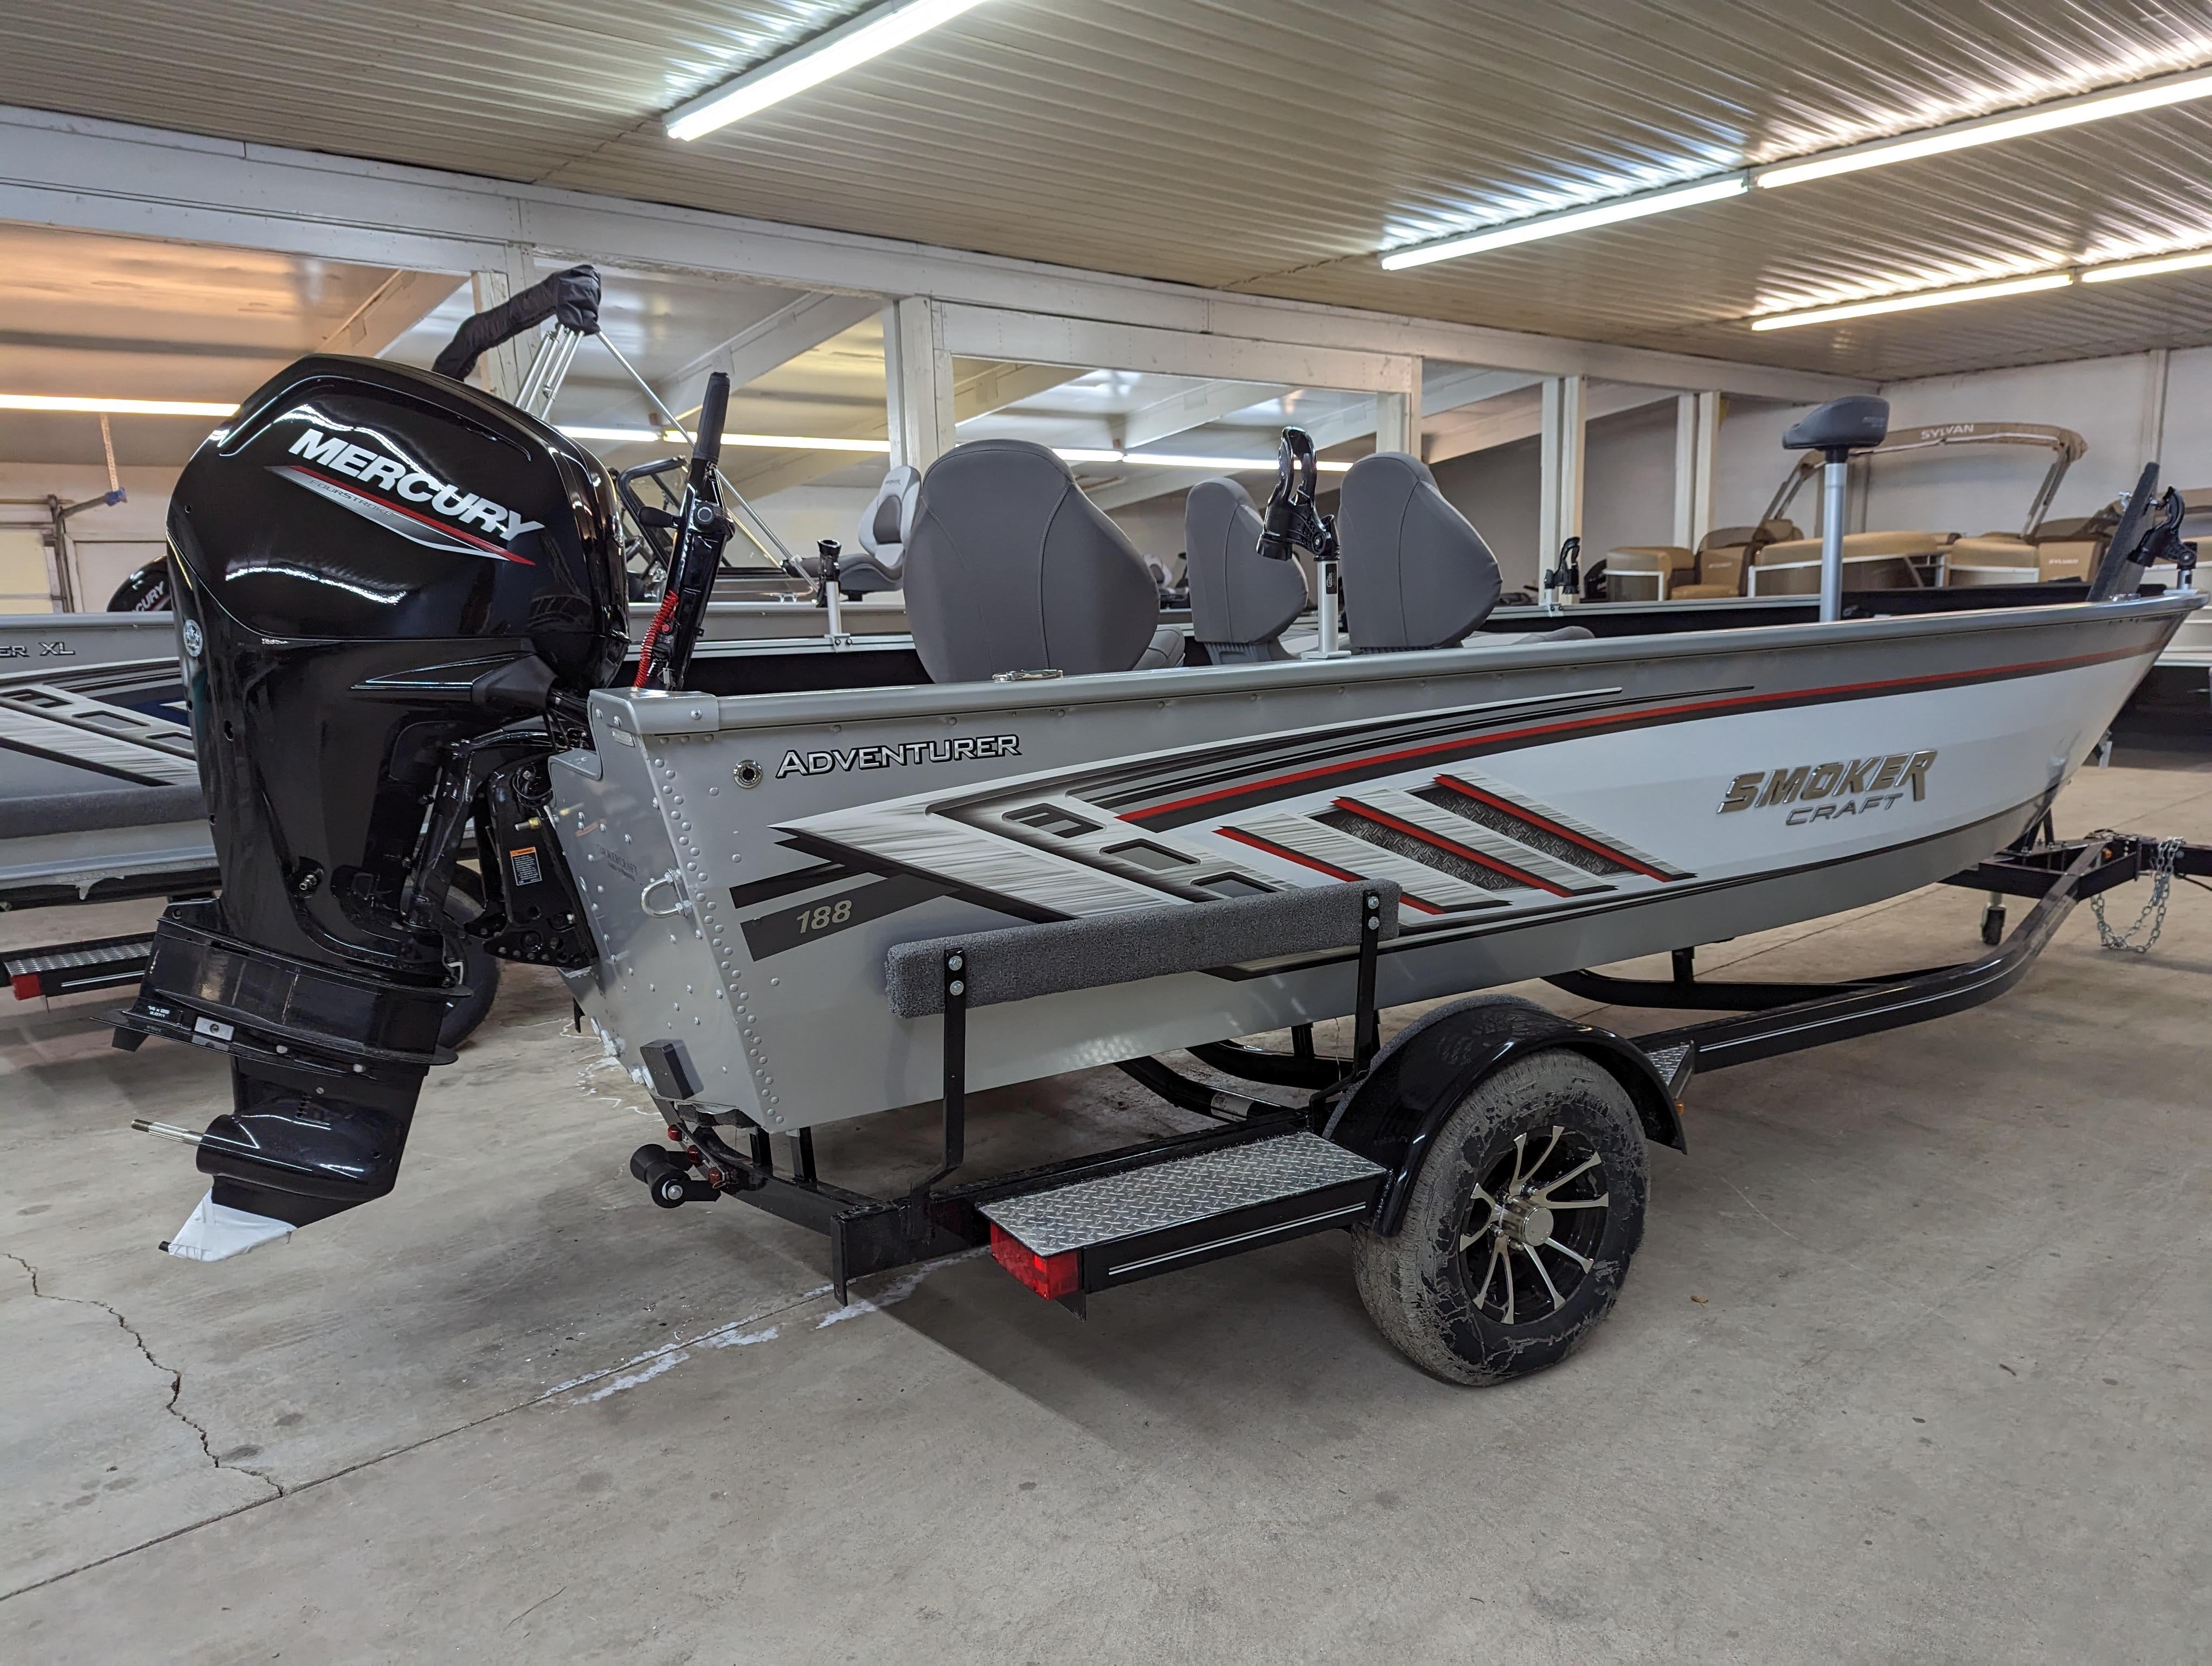 Explore Smoker Craft 162 Pro Angler Xl Boats For Sale - Boat Trader